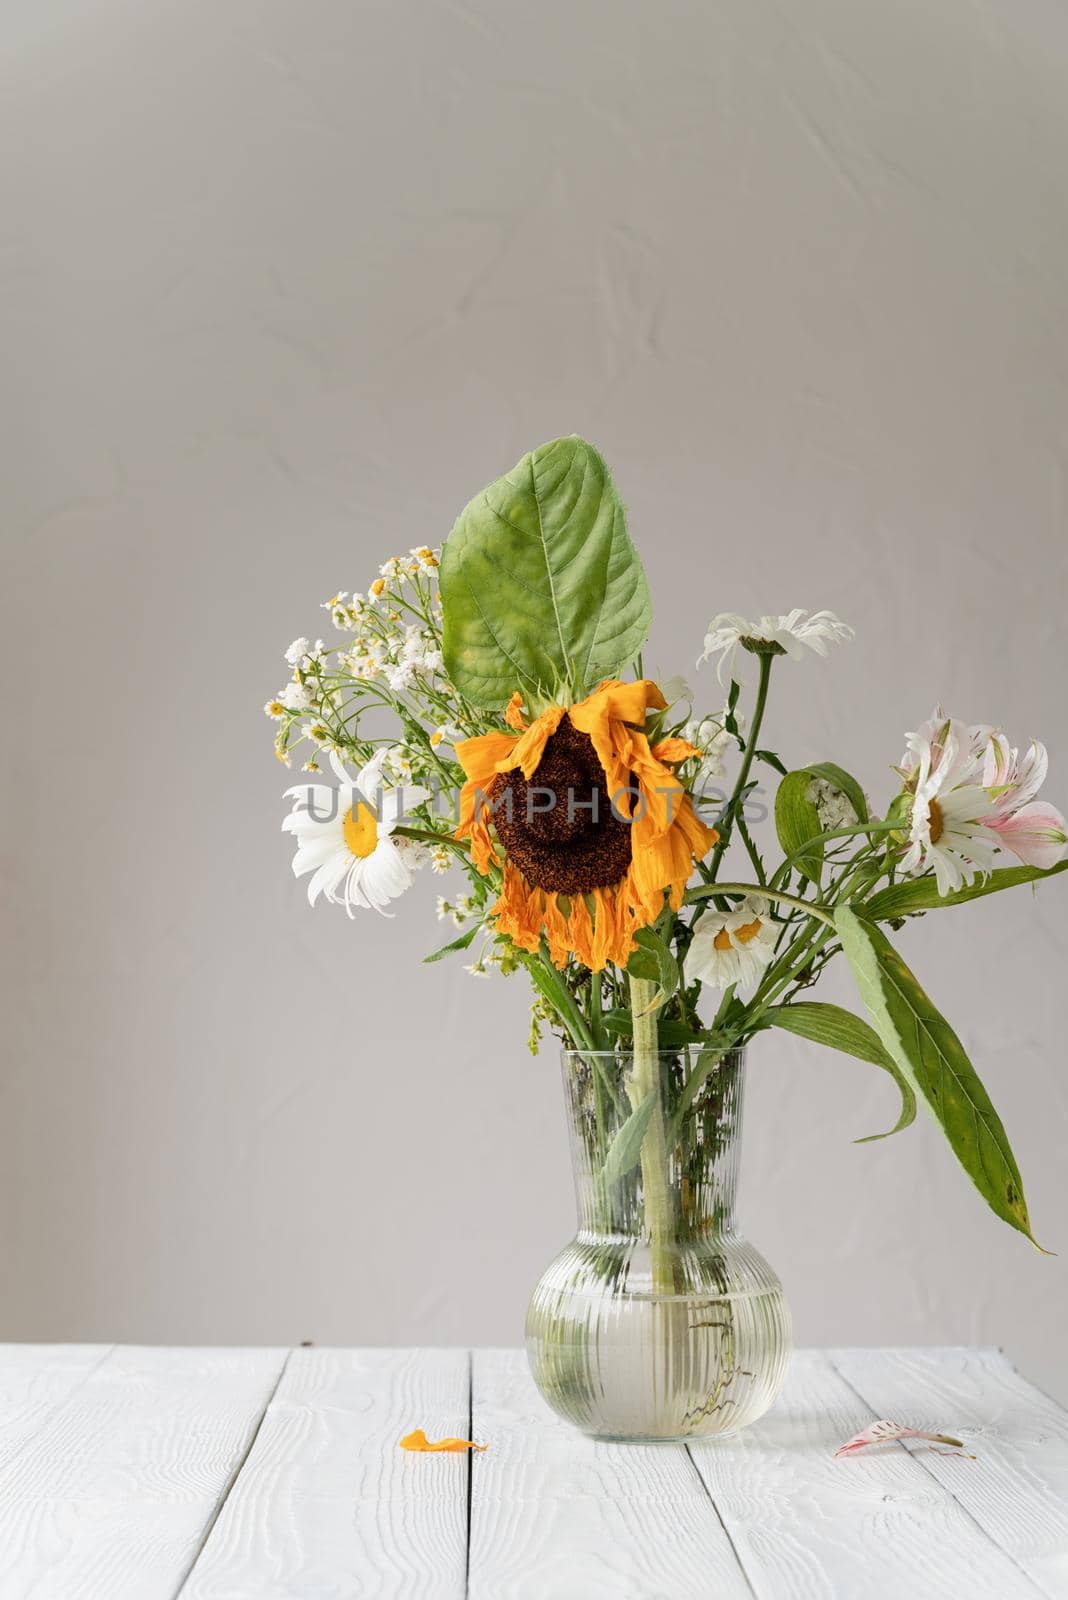 Autumn concept. A bouquet of withered dry flowers and a sunflower in a vase